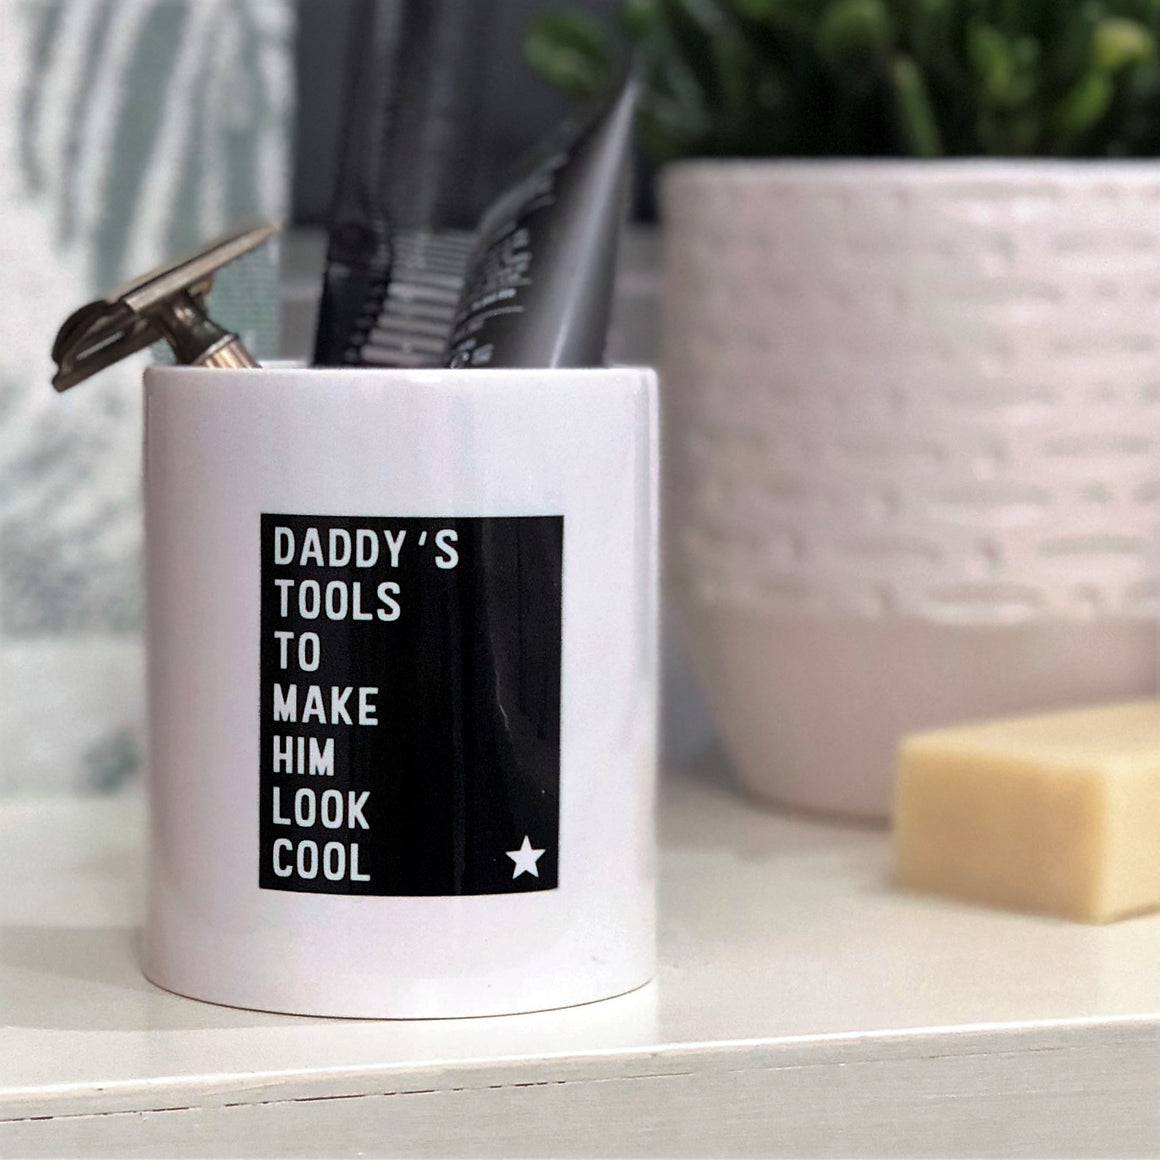 Daddys Tools To Make Him Look Cool Grooming Kit Pot